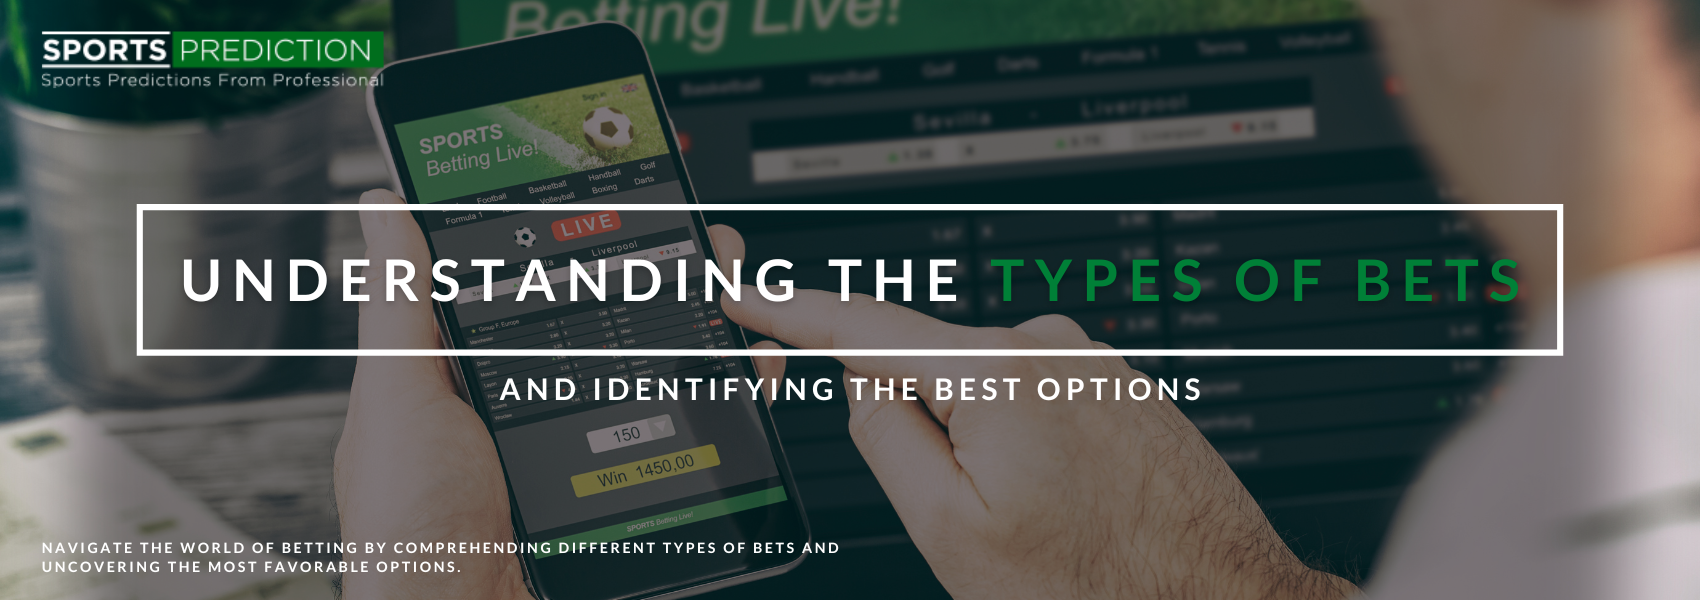 Understanding The Types Of Bets And Identifying The Best Options